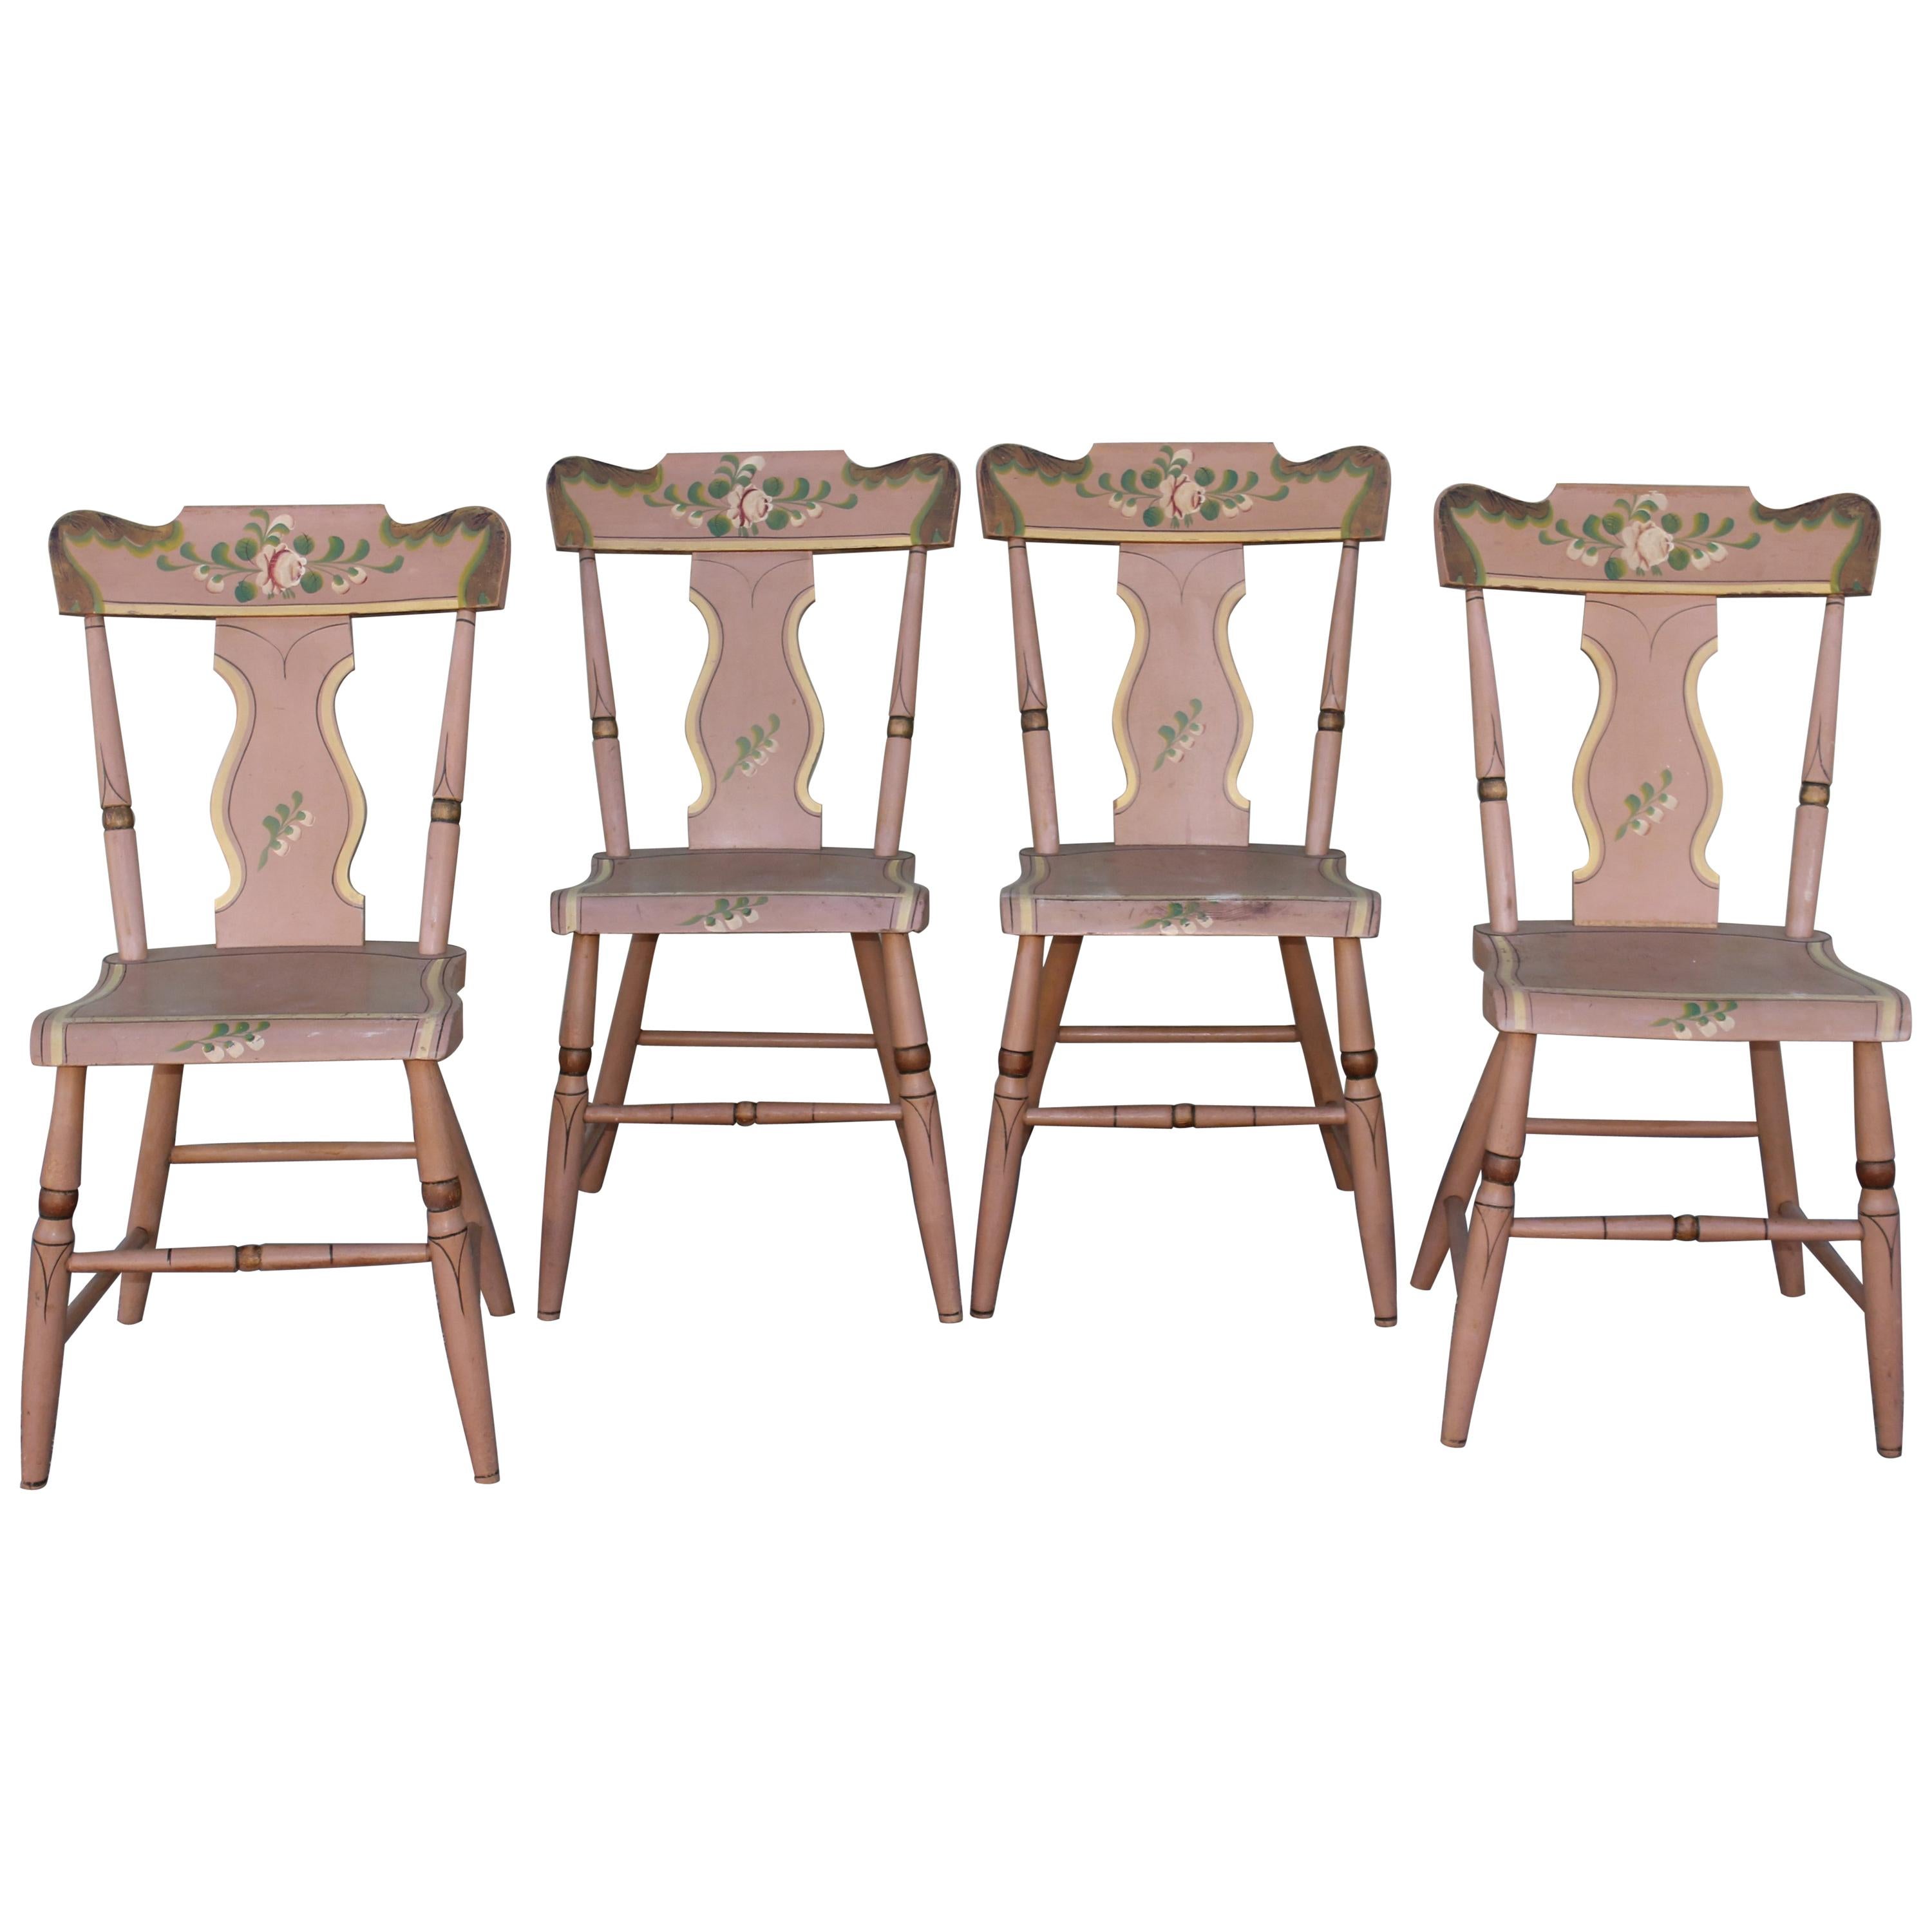 Set of Four 19th C Original Painted Pennsylvania Plank Bottom Chairs For Sale